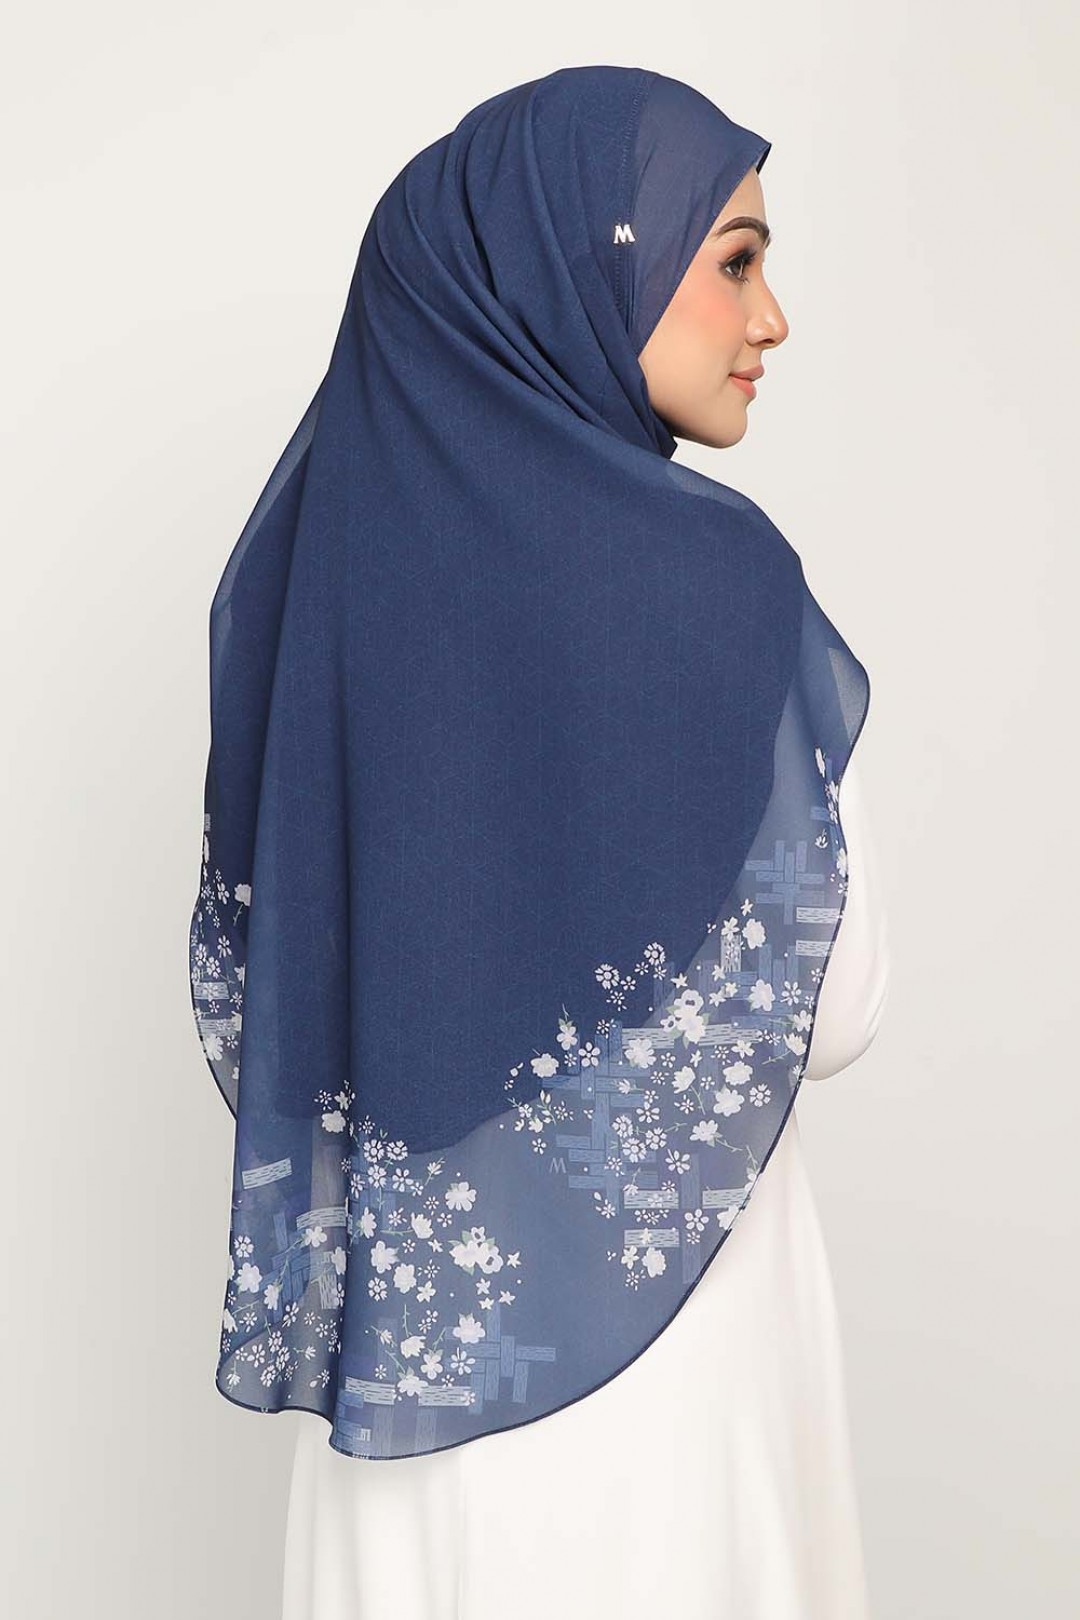 As-Is Umma Printed 2-Layer Jelly Blue